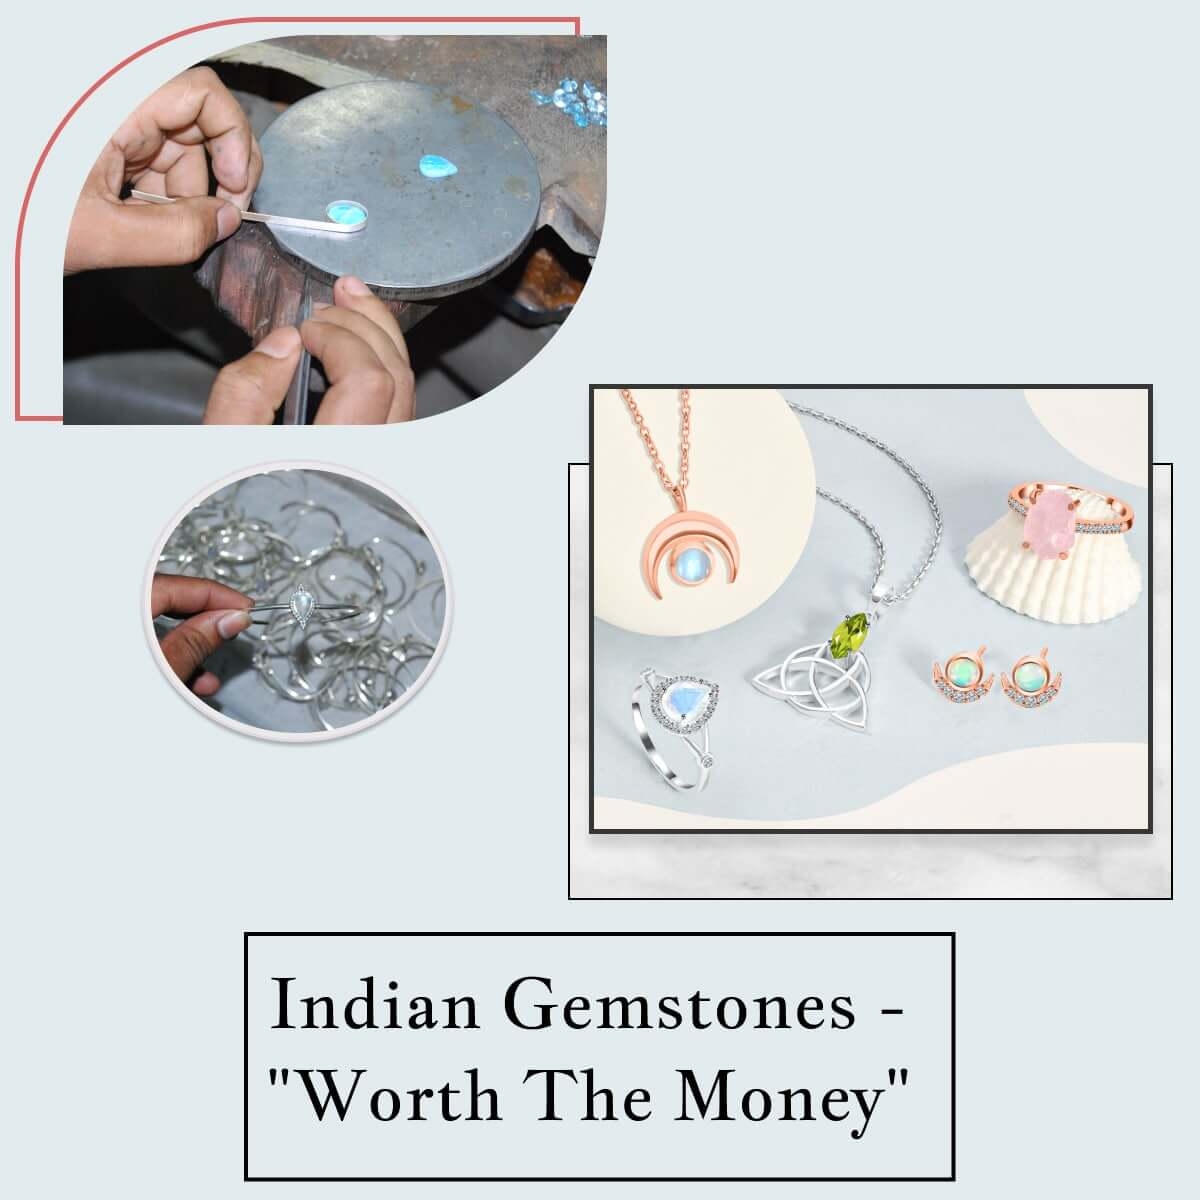 Why Gemstones From India Are Affordable